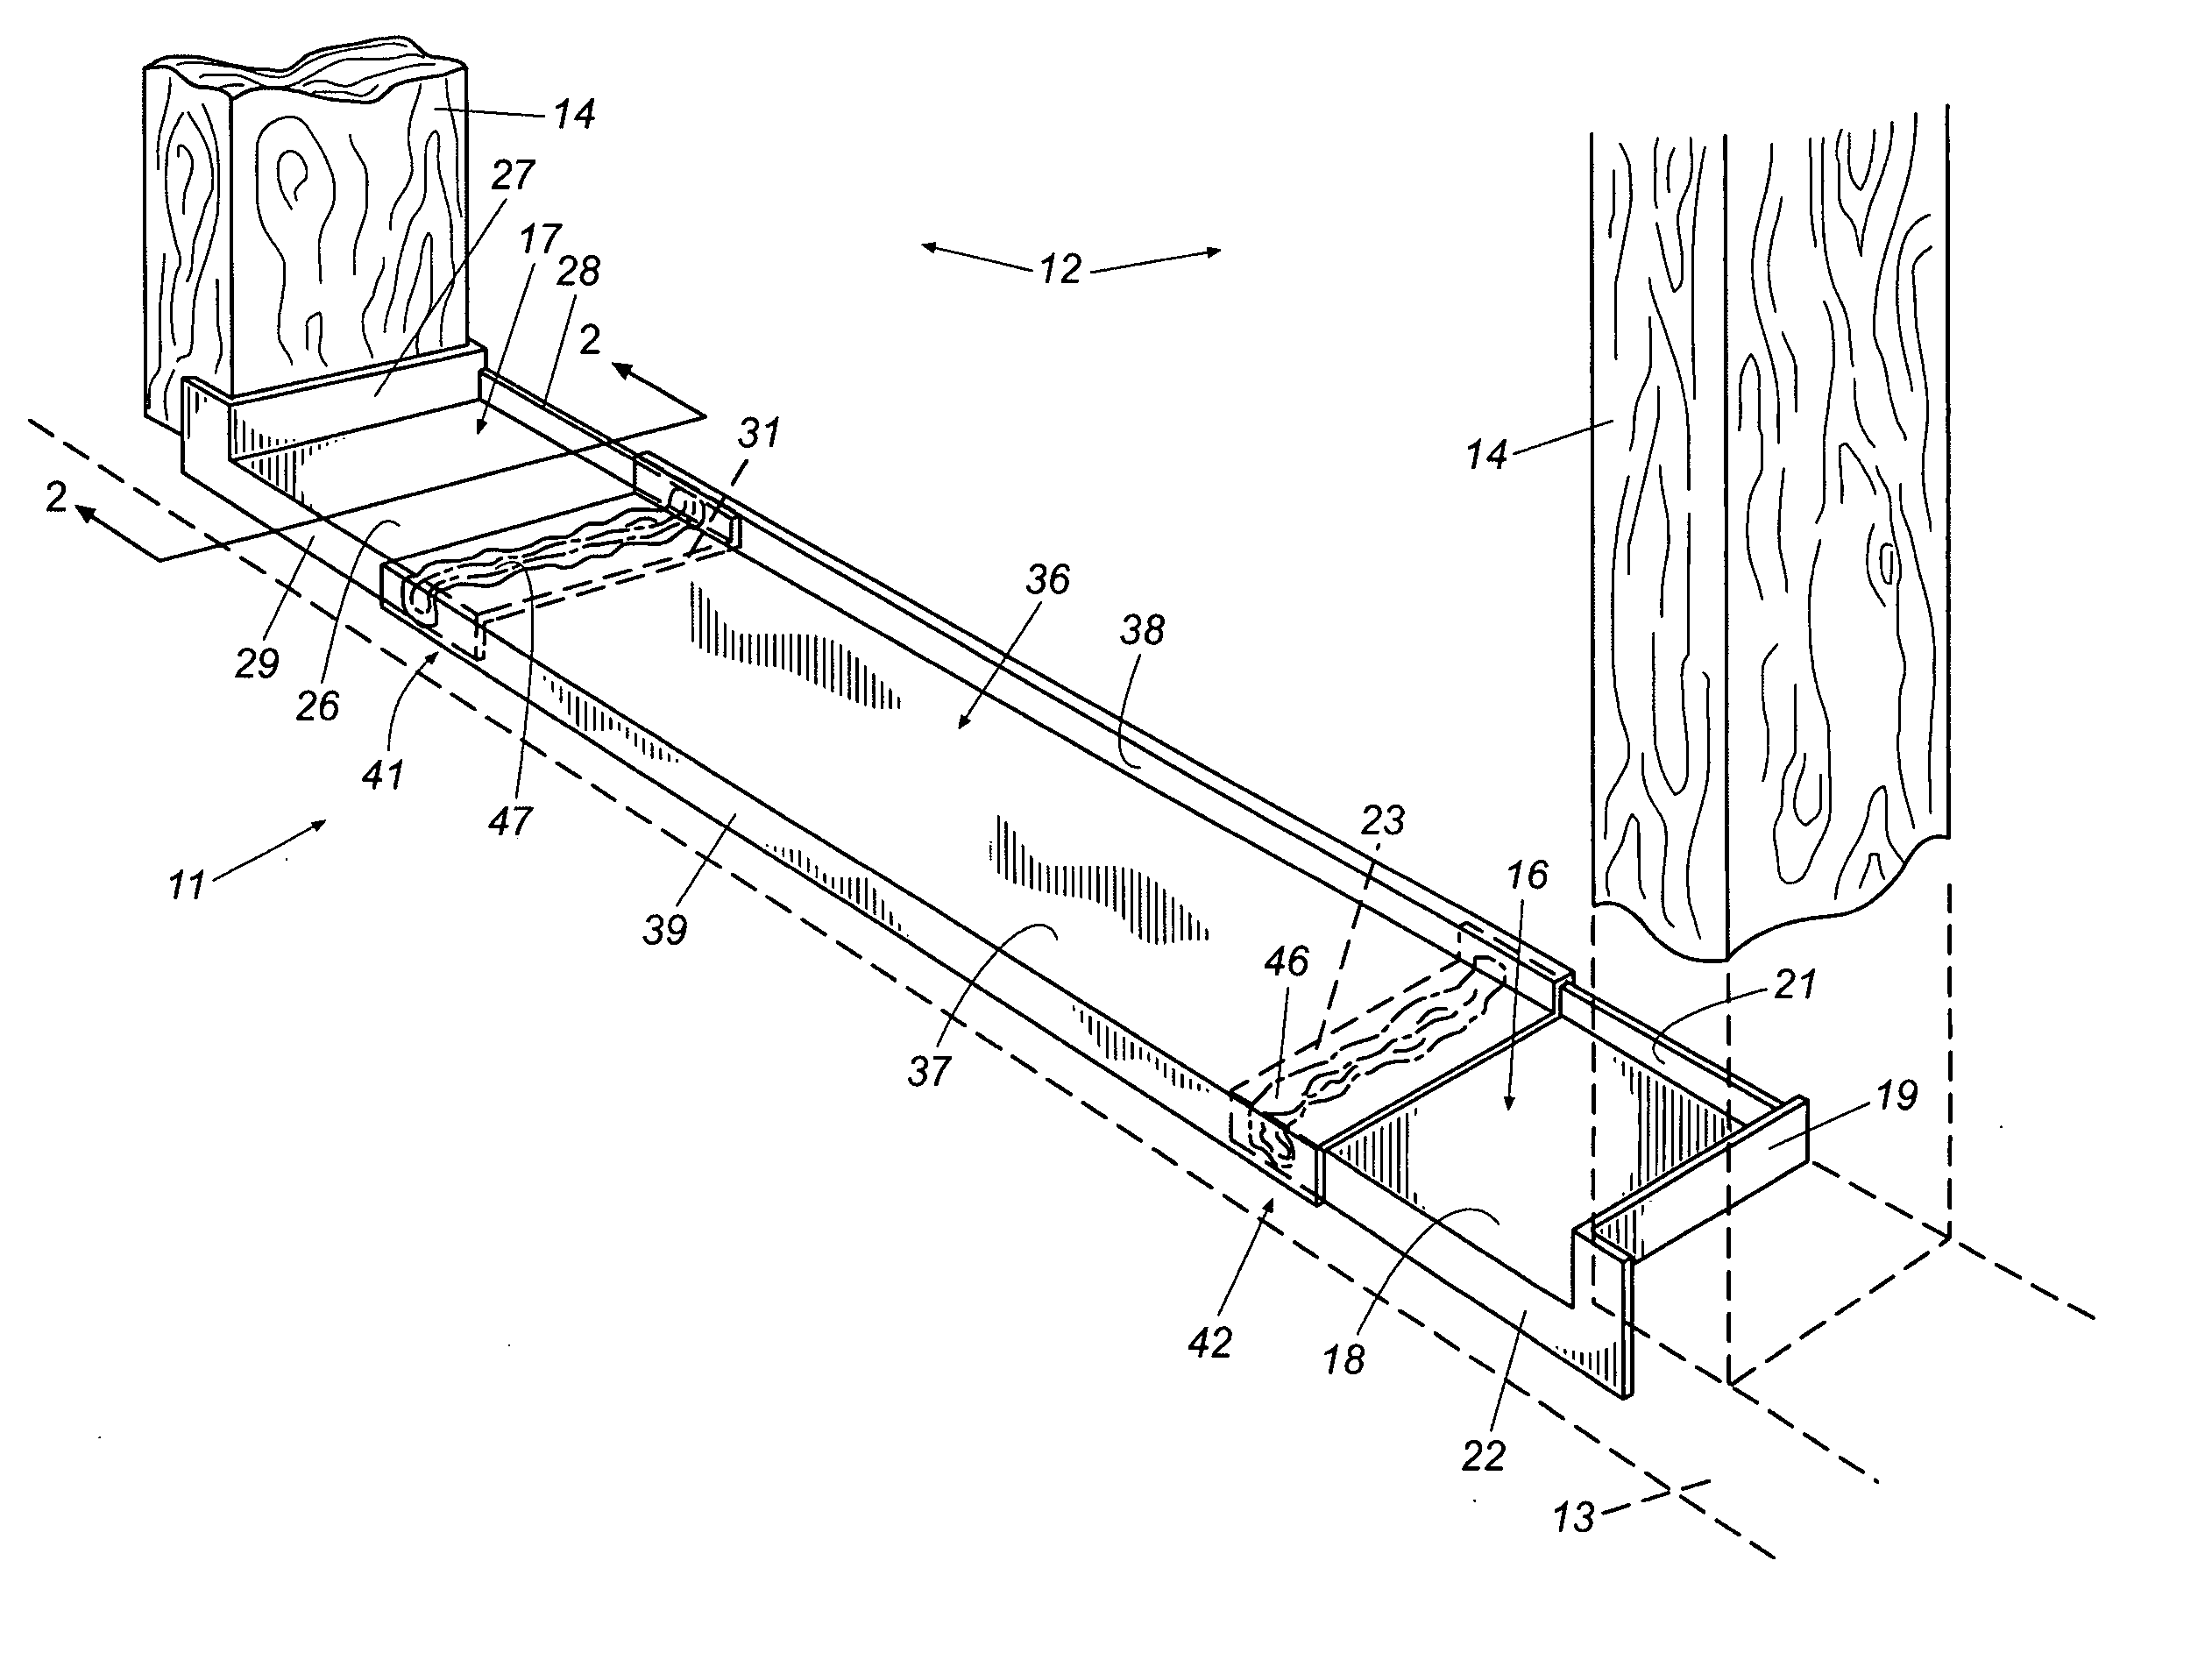 Sill pan system